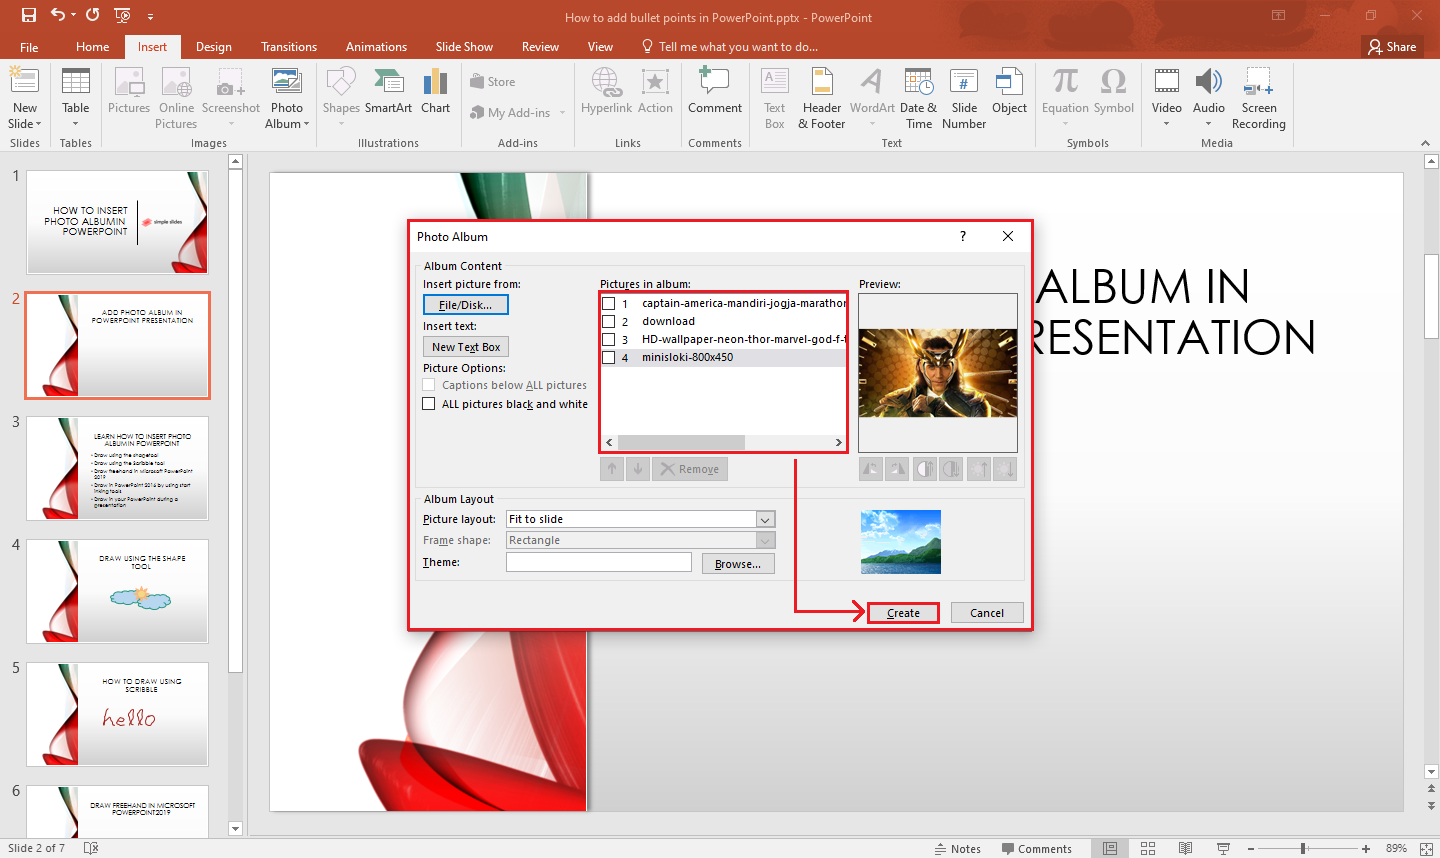 Once you select "Insert," click update to create a new Photo album in your PowerPoint